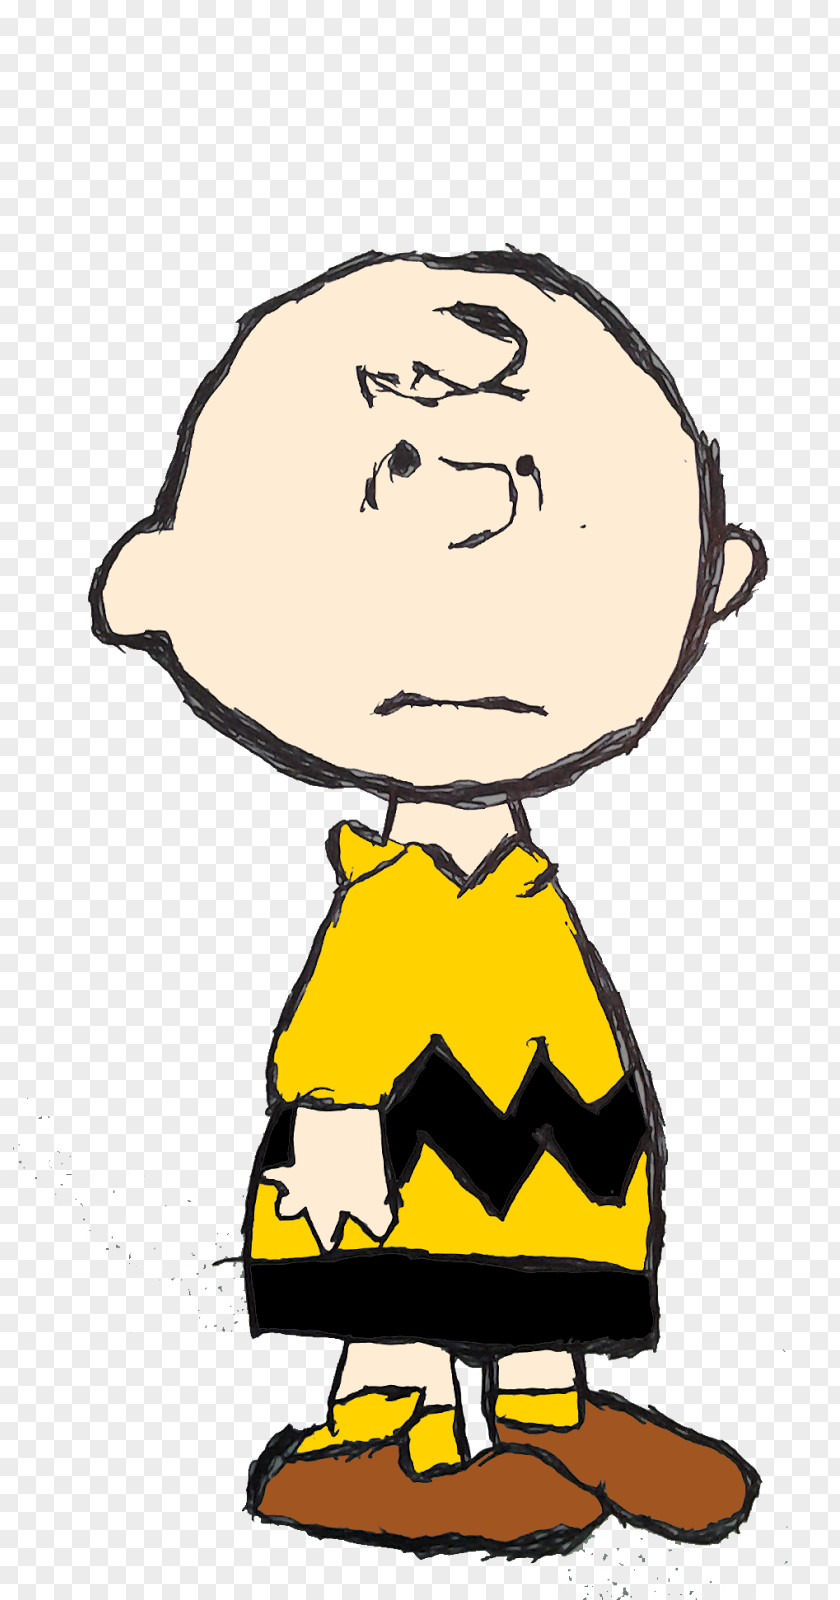 Snoopy Peanuts Charlie Brown Clip Art Illustration PNG